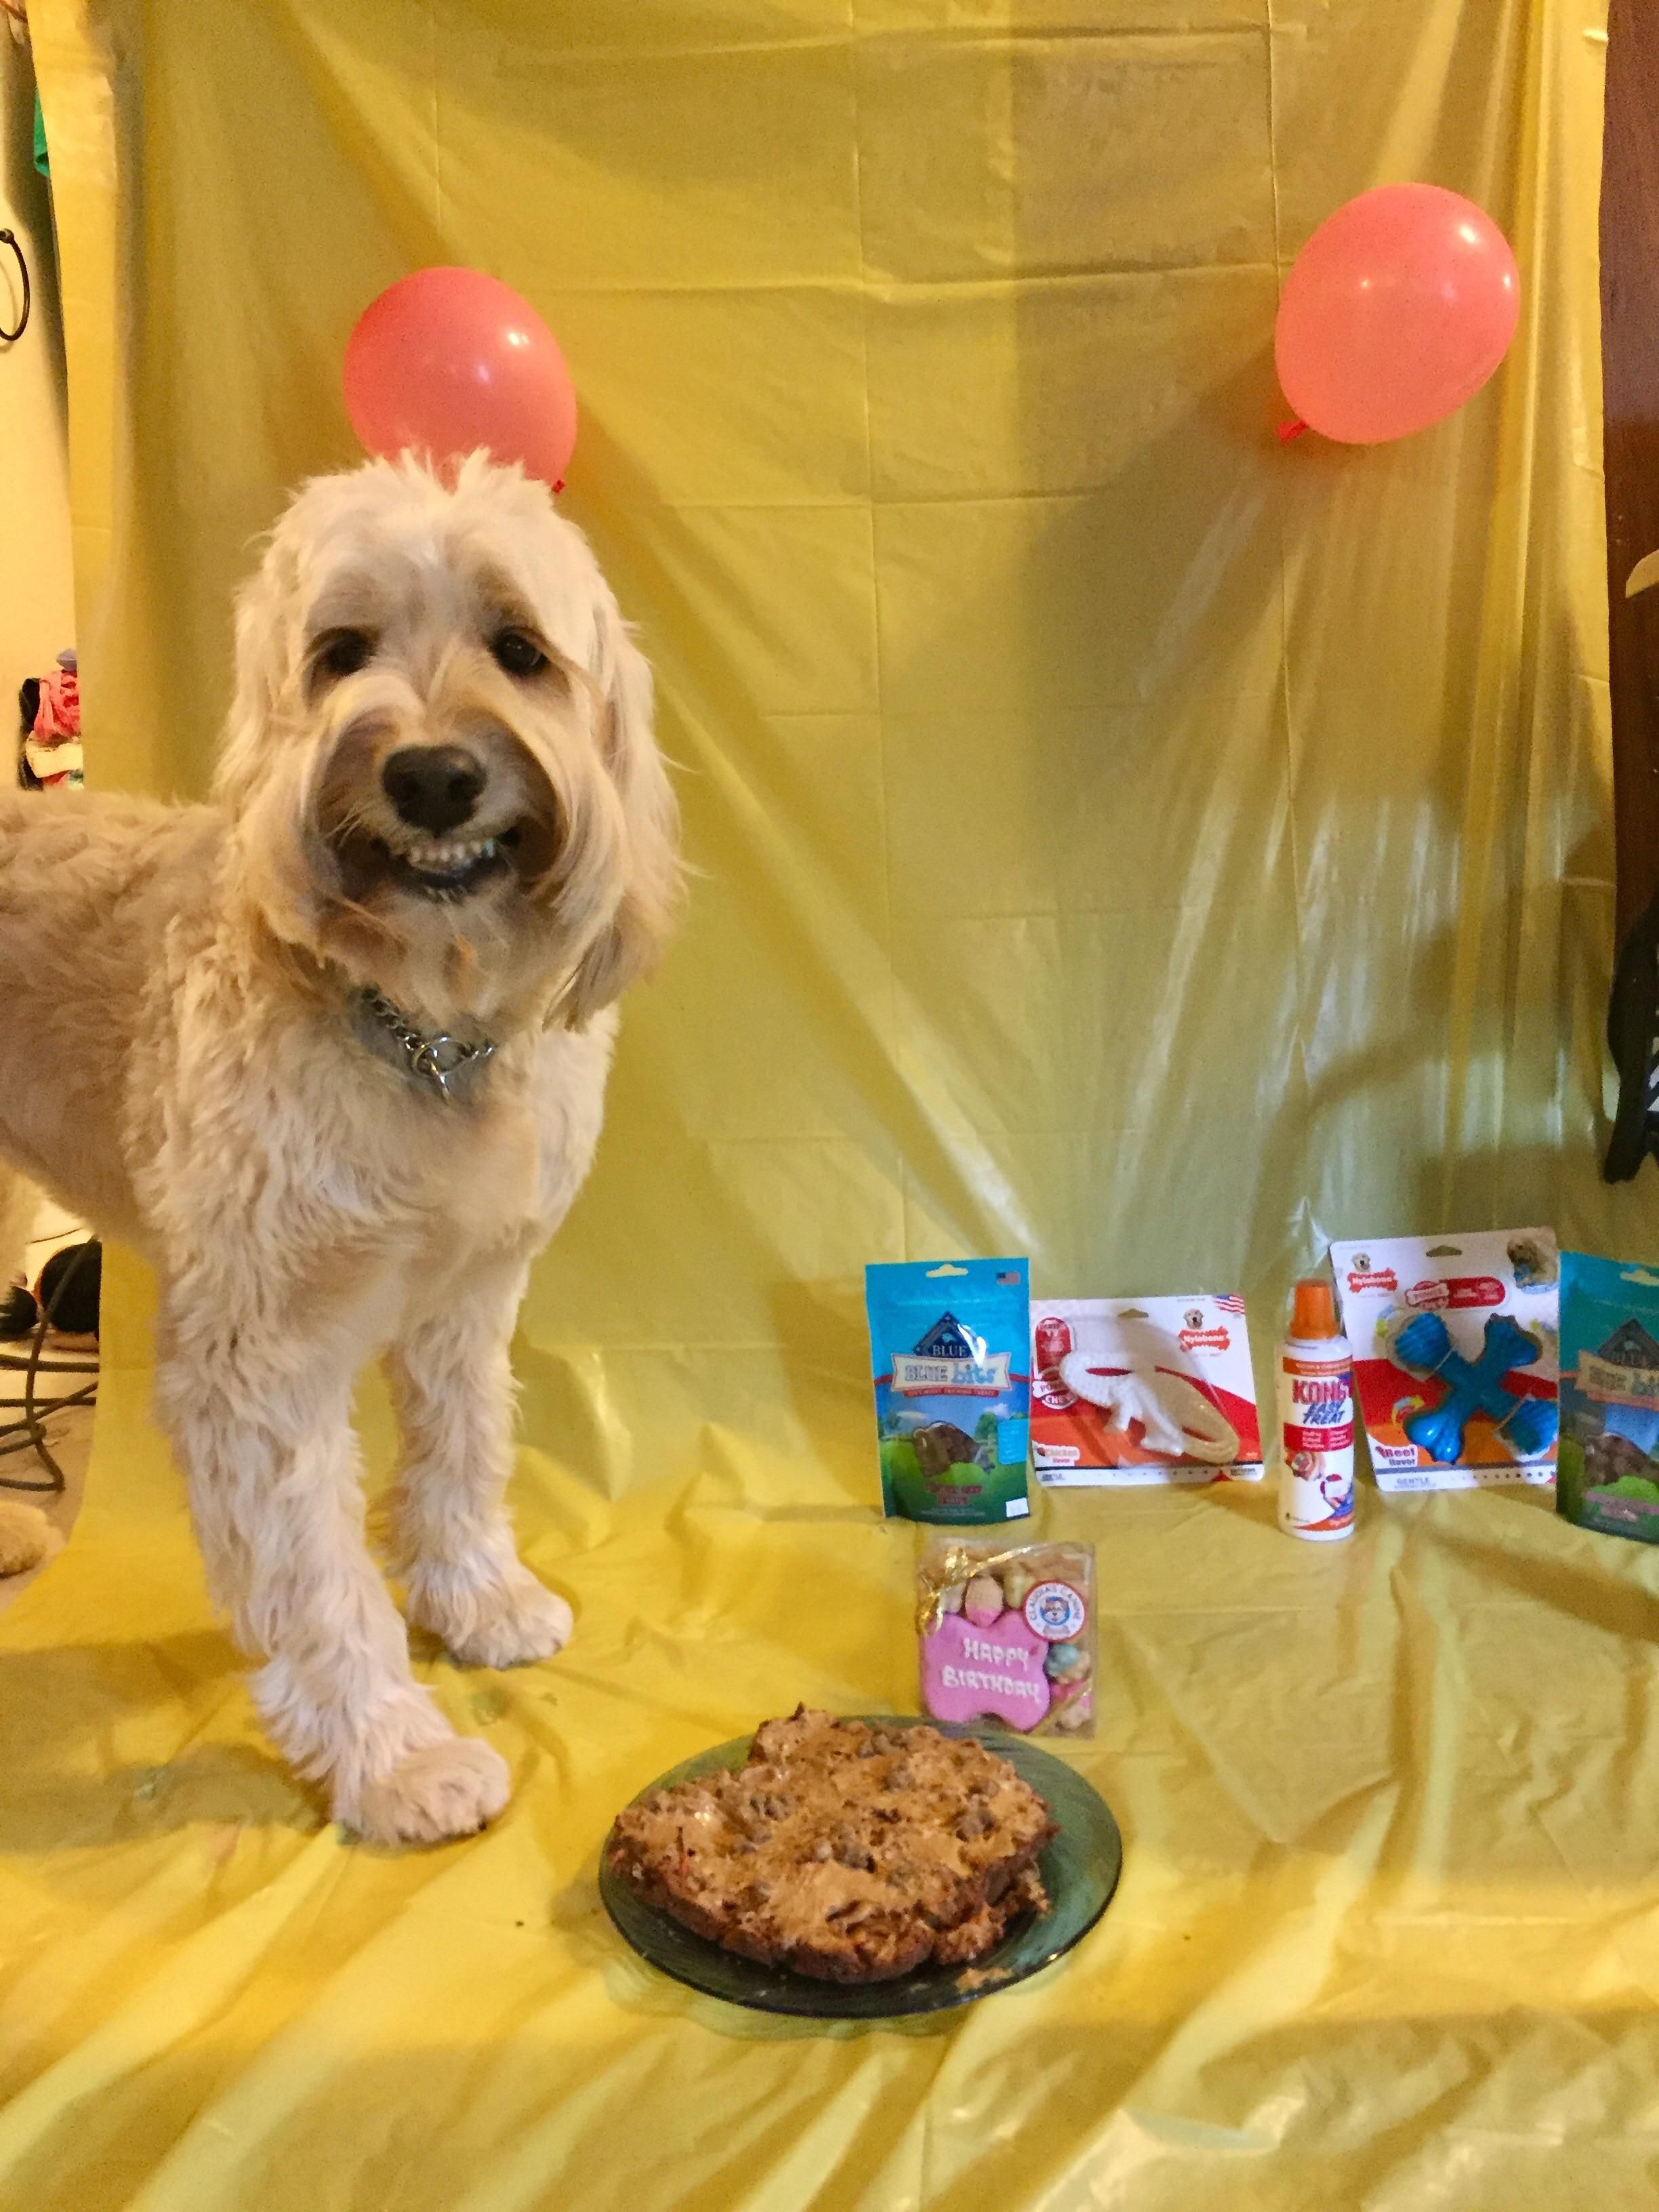 Today is my daughter's service dog's birthday.